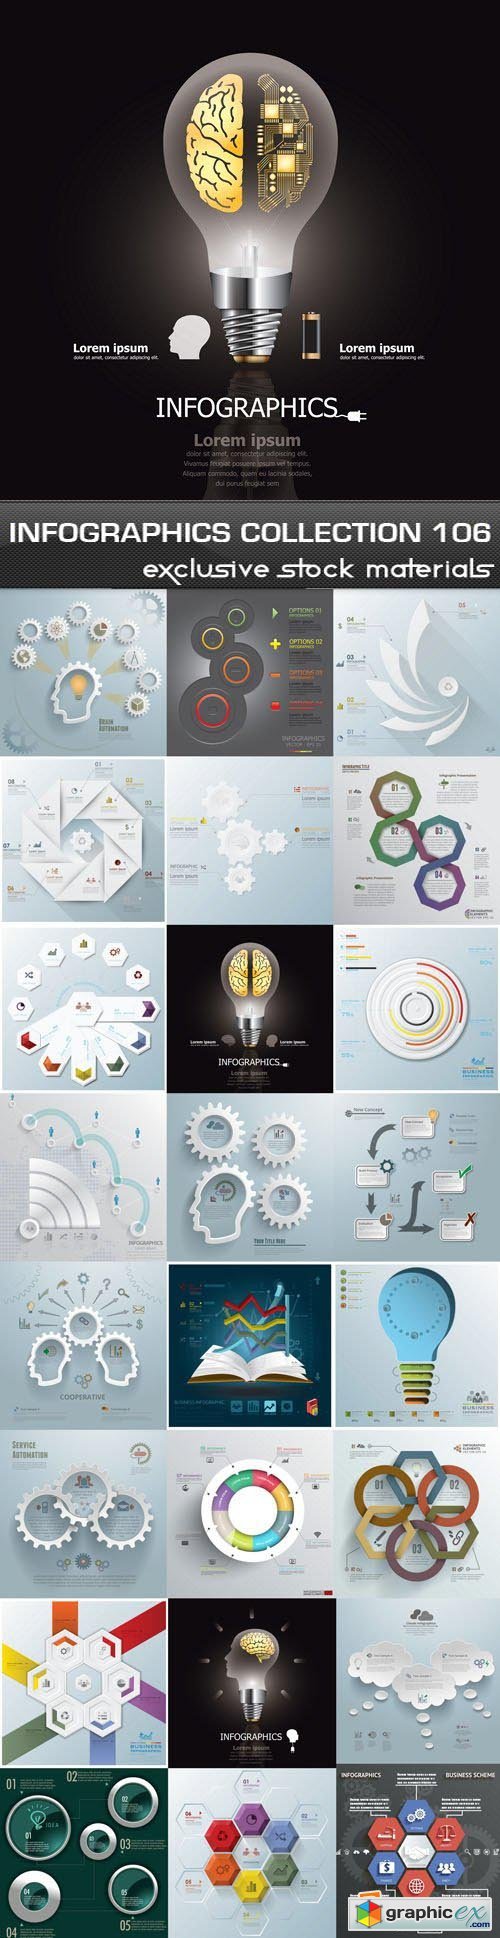 Collection of infographics vol.106, 25xEPS